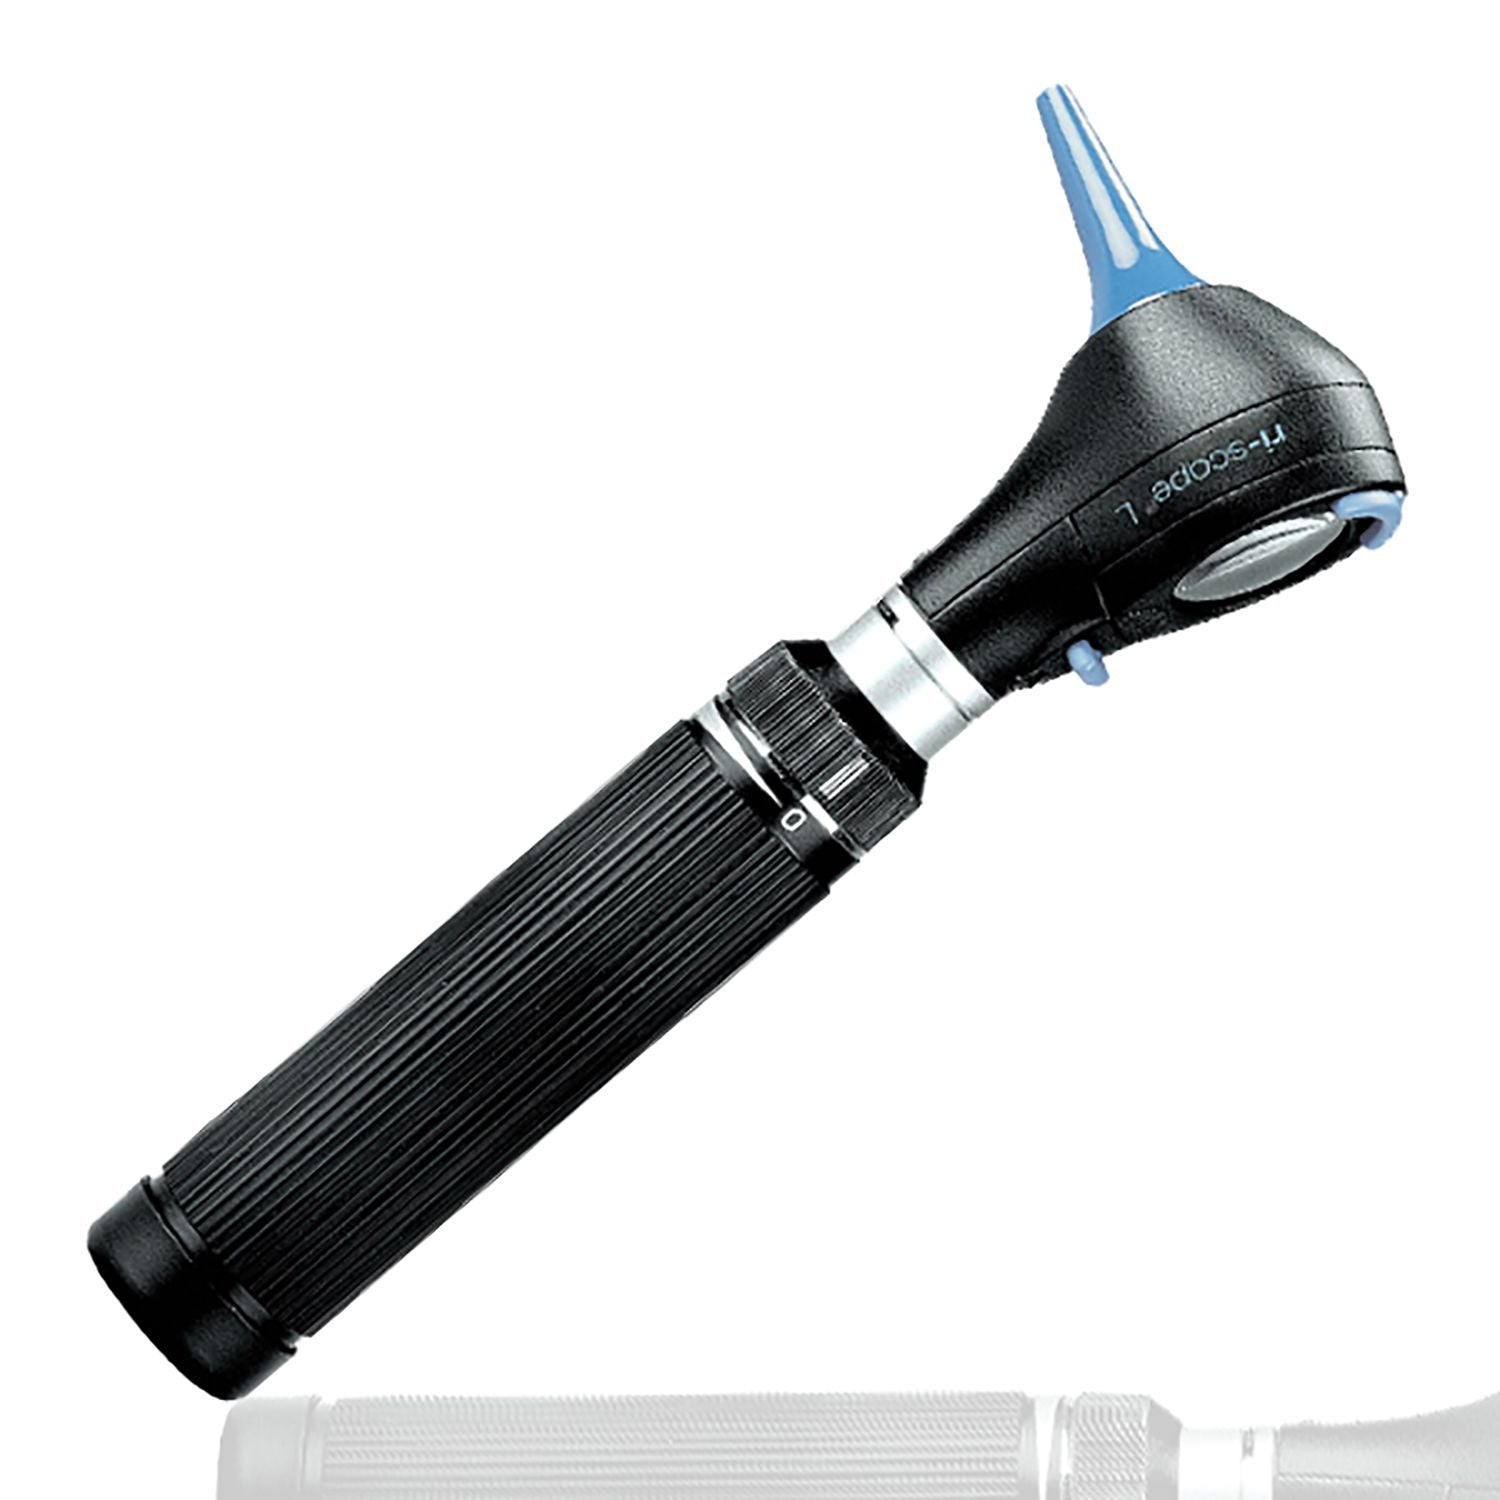 Riester Otoscope Advanced Fibre Optic 3.5v LED Rechargeable (Battery and plug in charger sold separately)